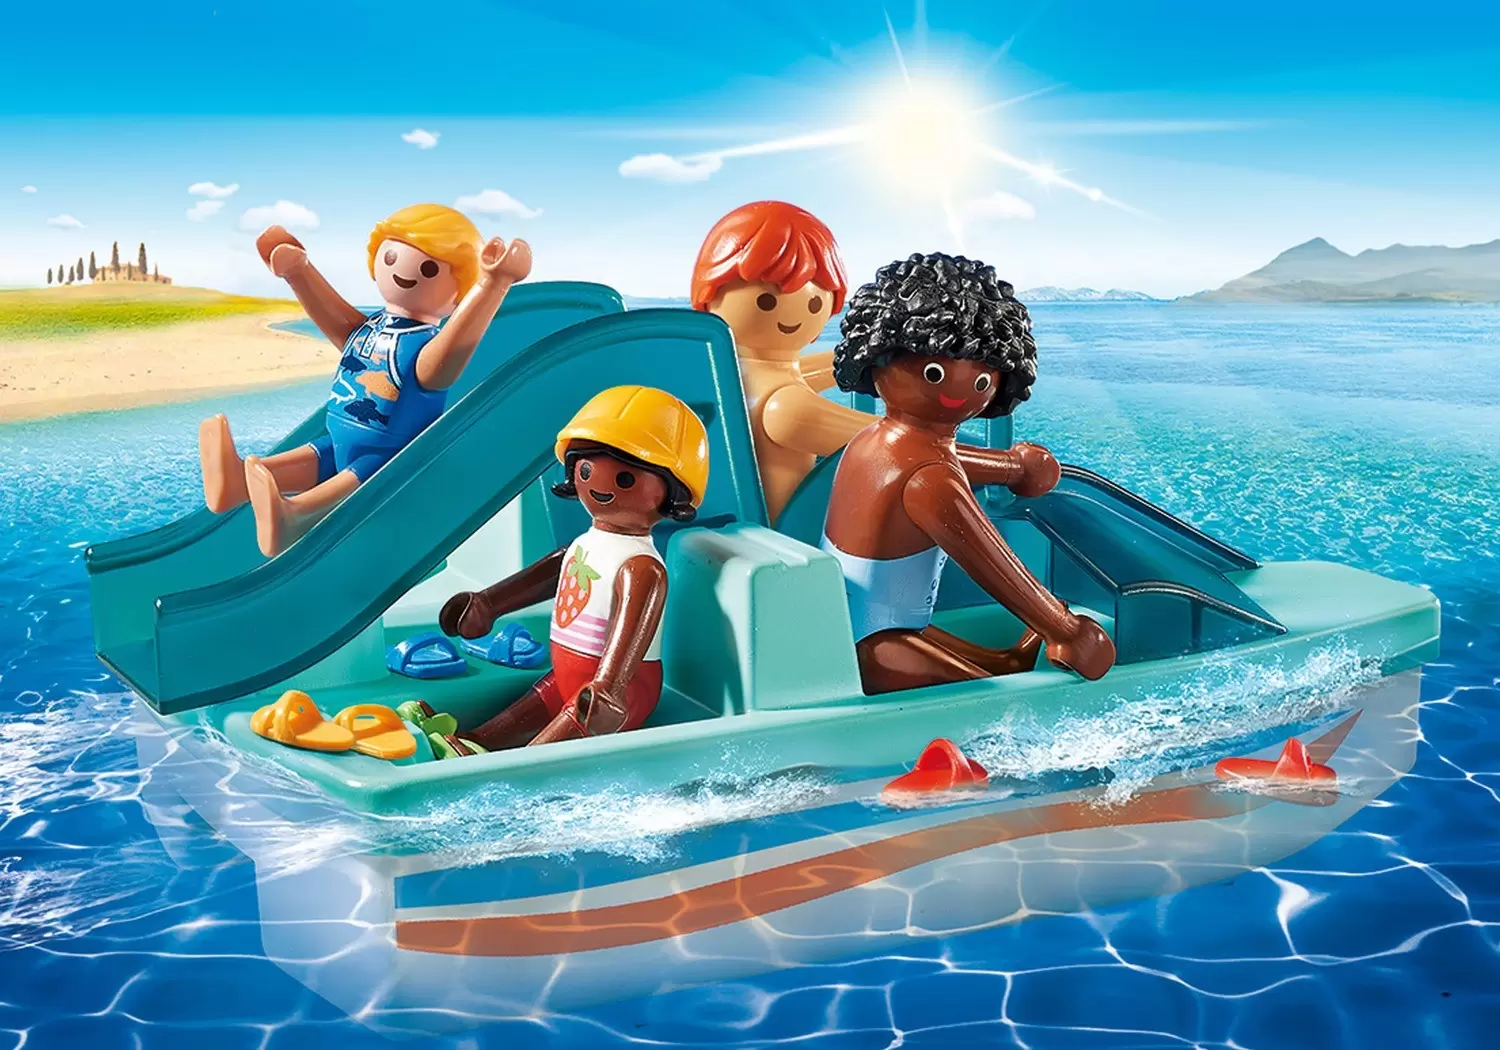 Playmobil on Hollidays - Pedal Boat